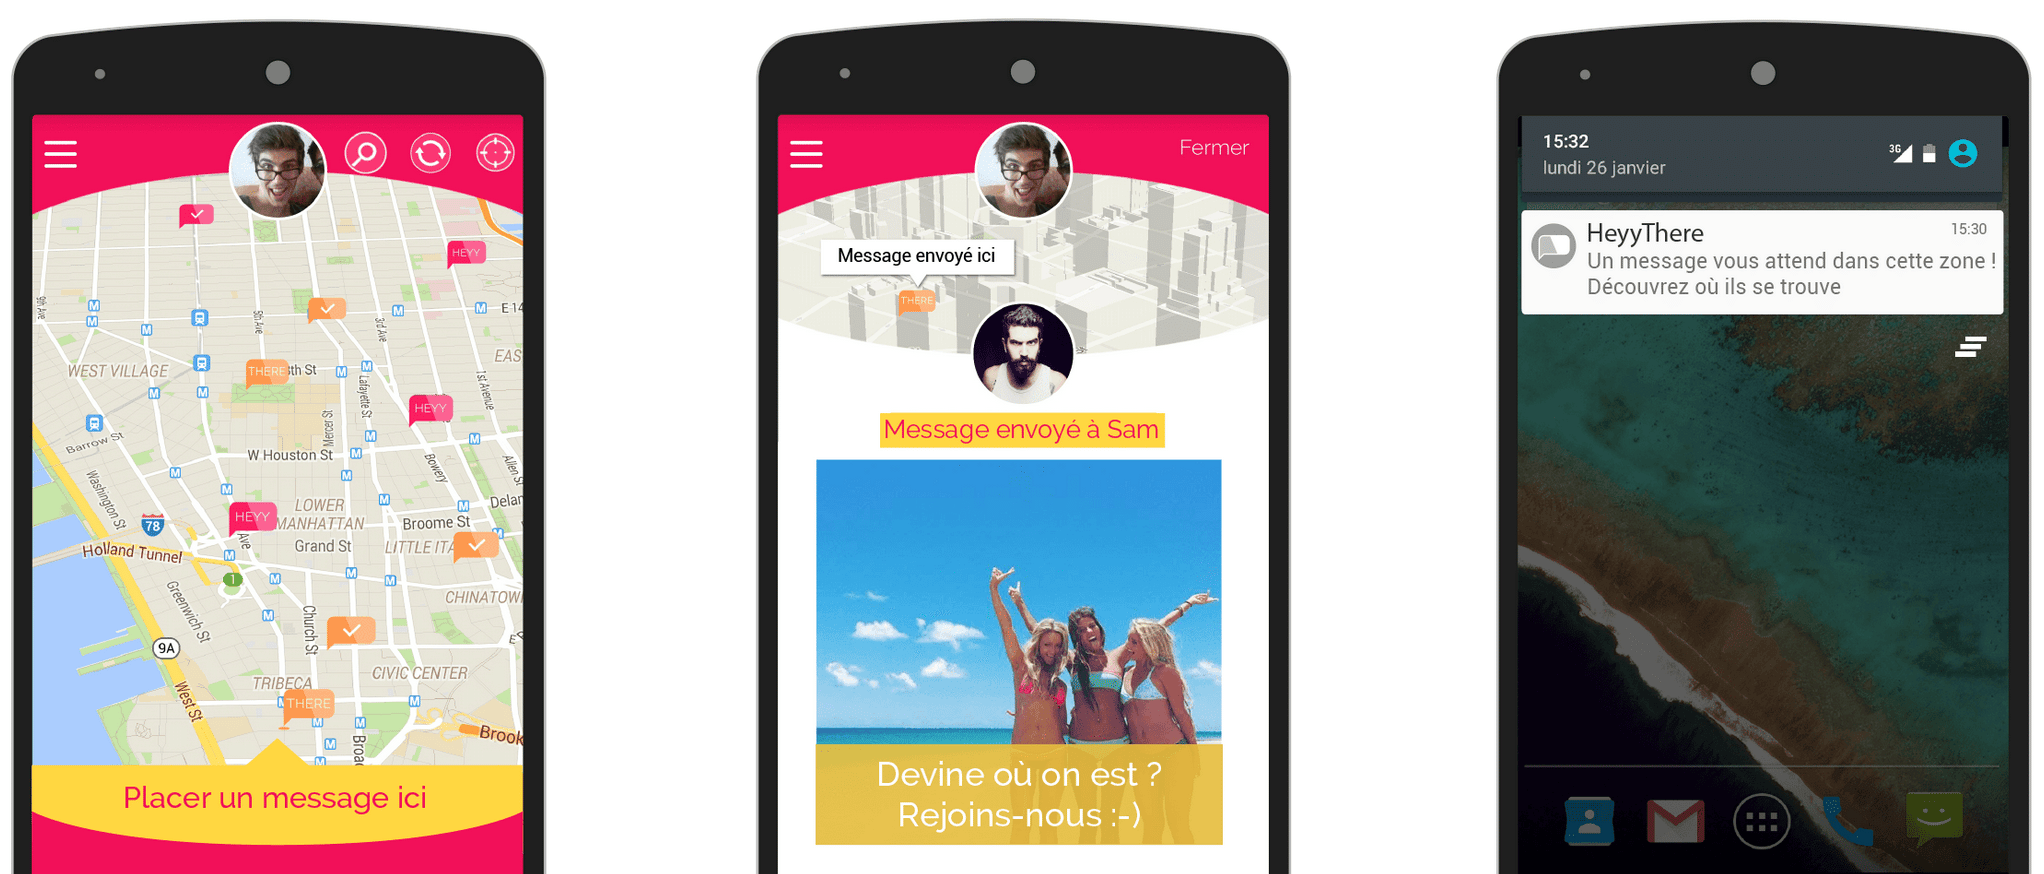 heyythere, HeyyThere : app gratuite Android originale et fun